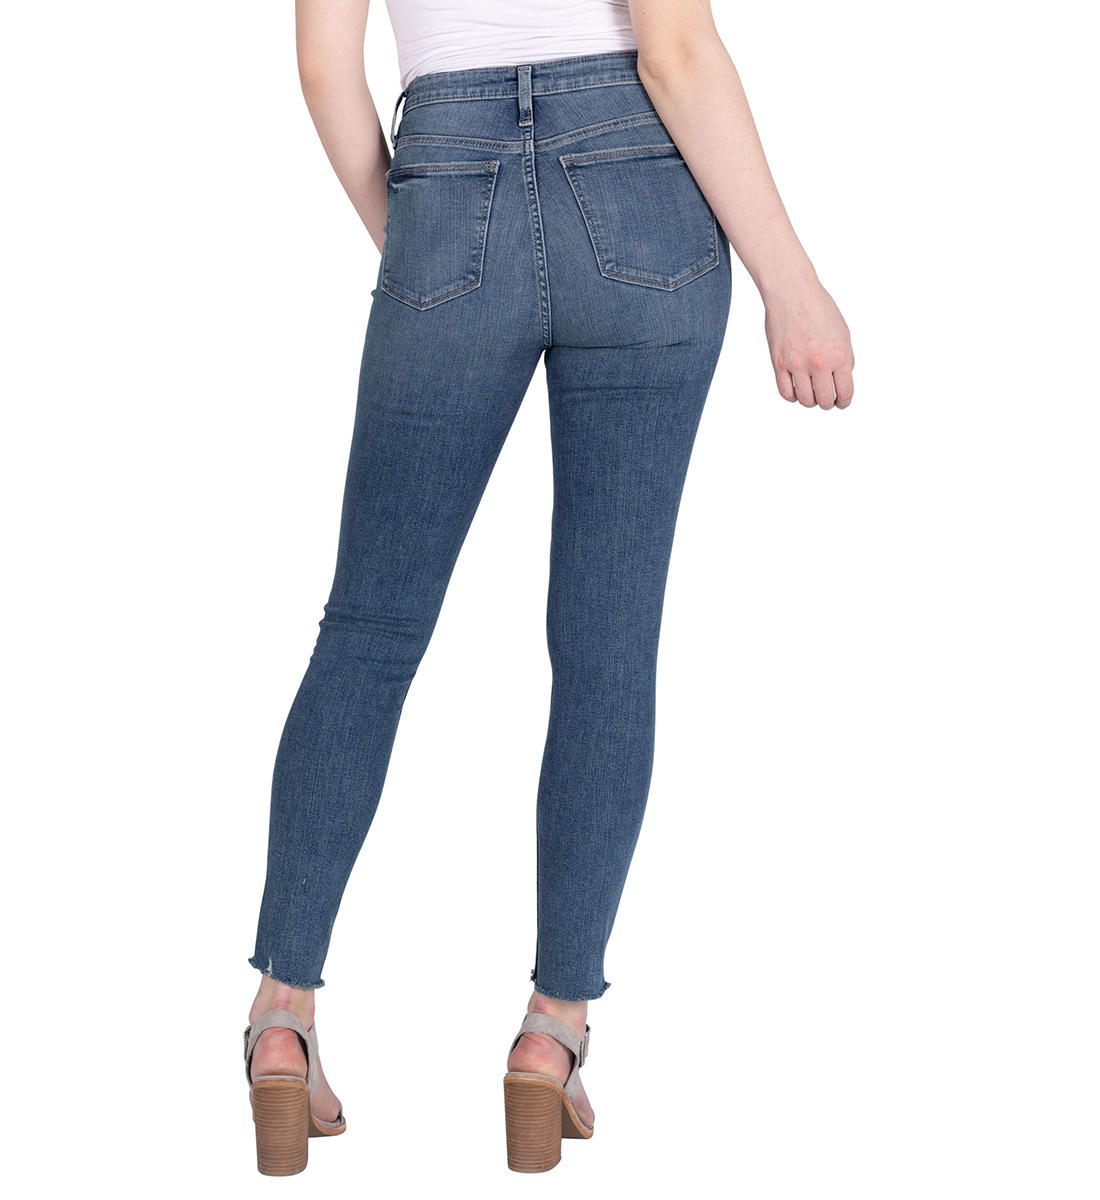 Silver High Note Skinny Jeans